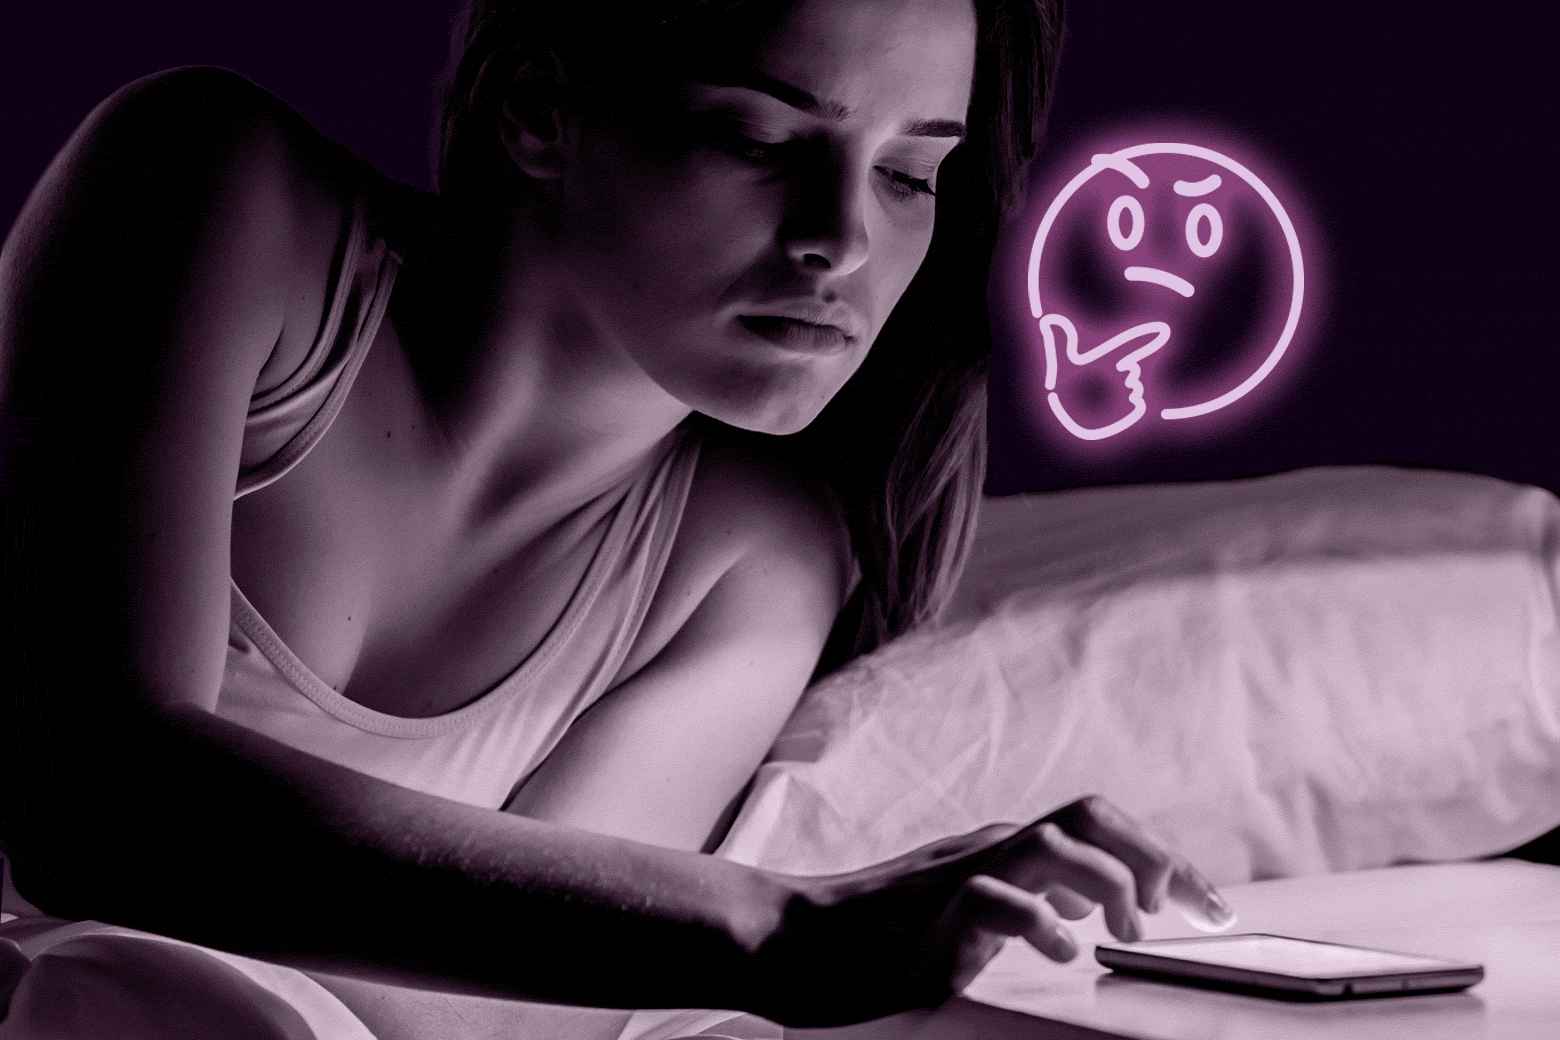 Woman in bed, typing on her phone on her nightstand.